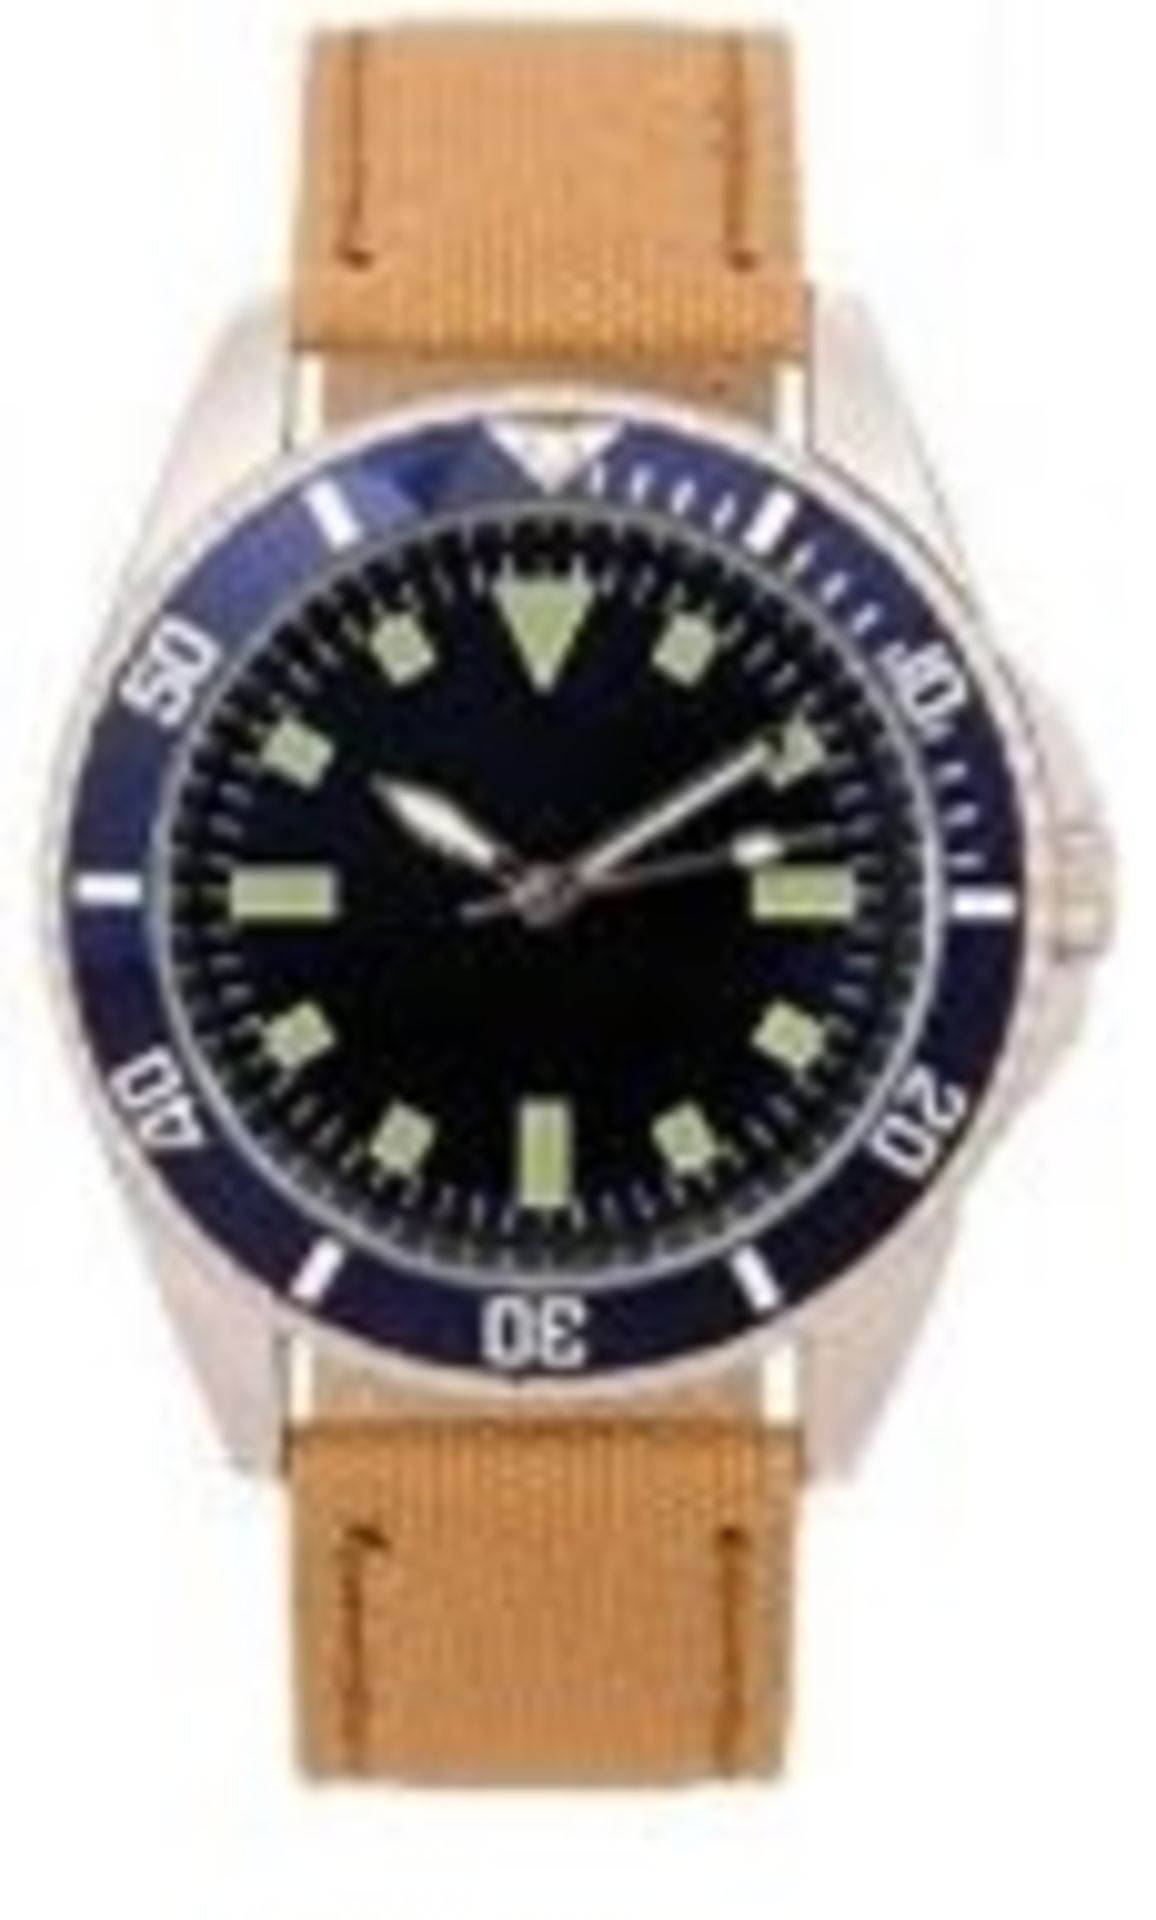 + VAT Brand New Gents 1980s French Naval Diver Watch with Engraved Back in Presentation Box